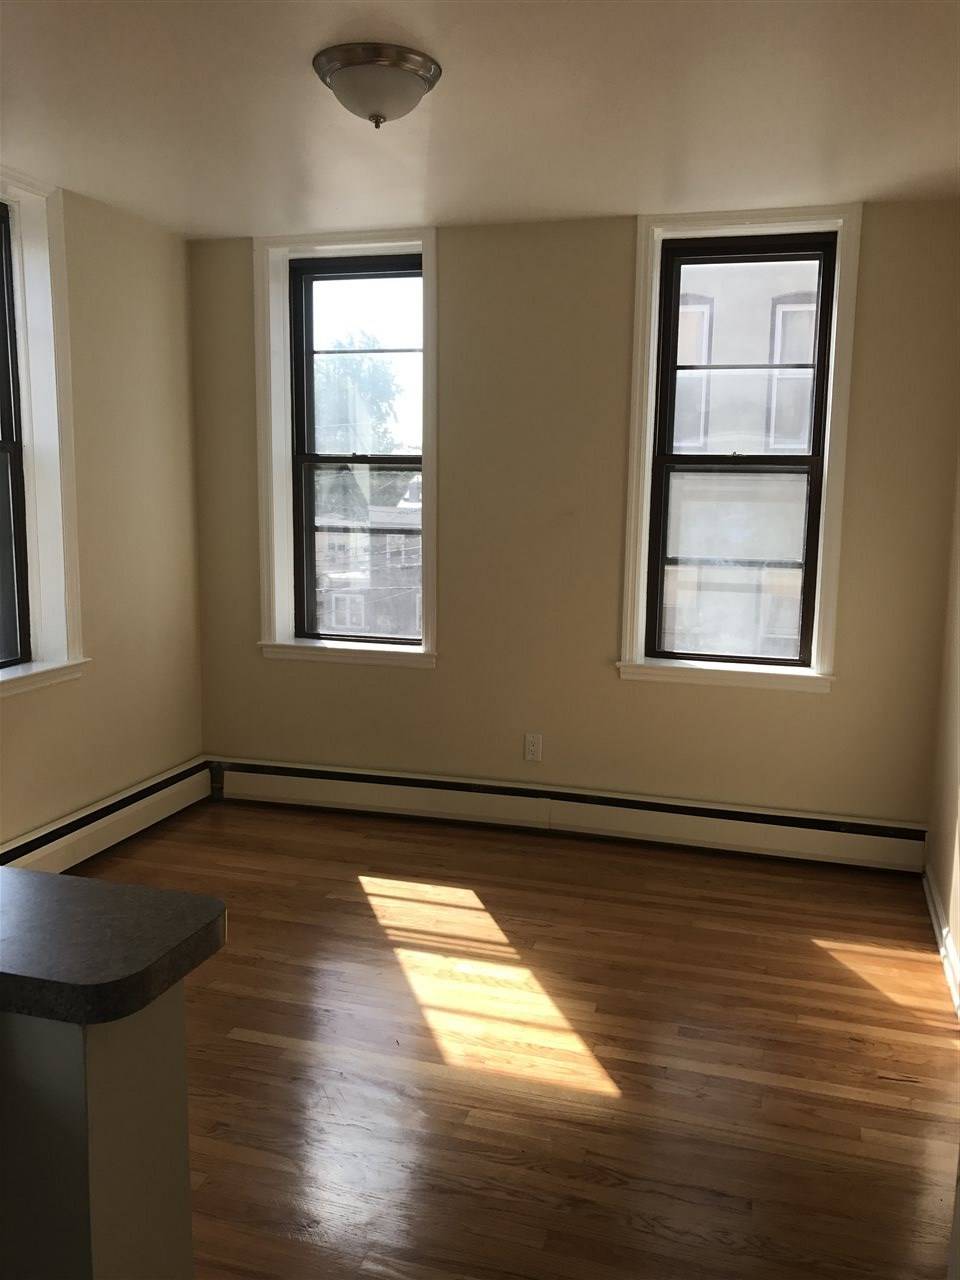 Renovated 1 BR apartment near NYC bus and shopping